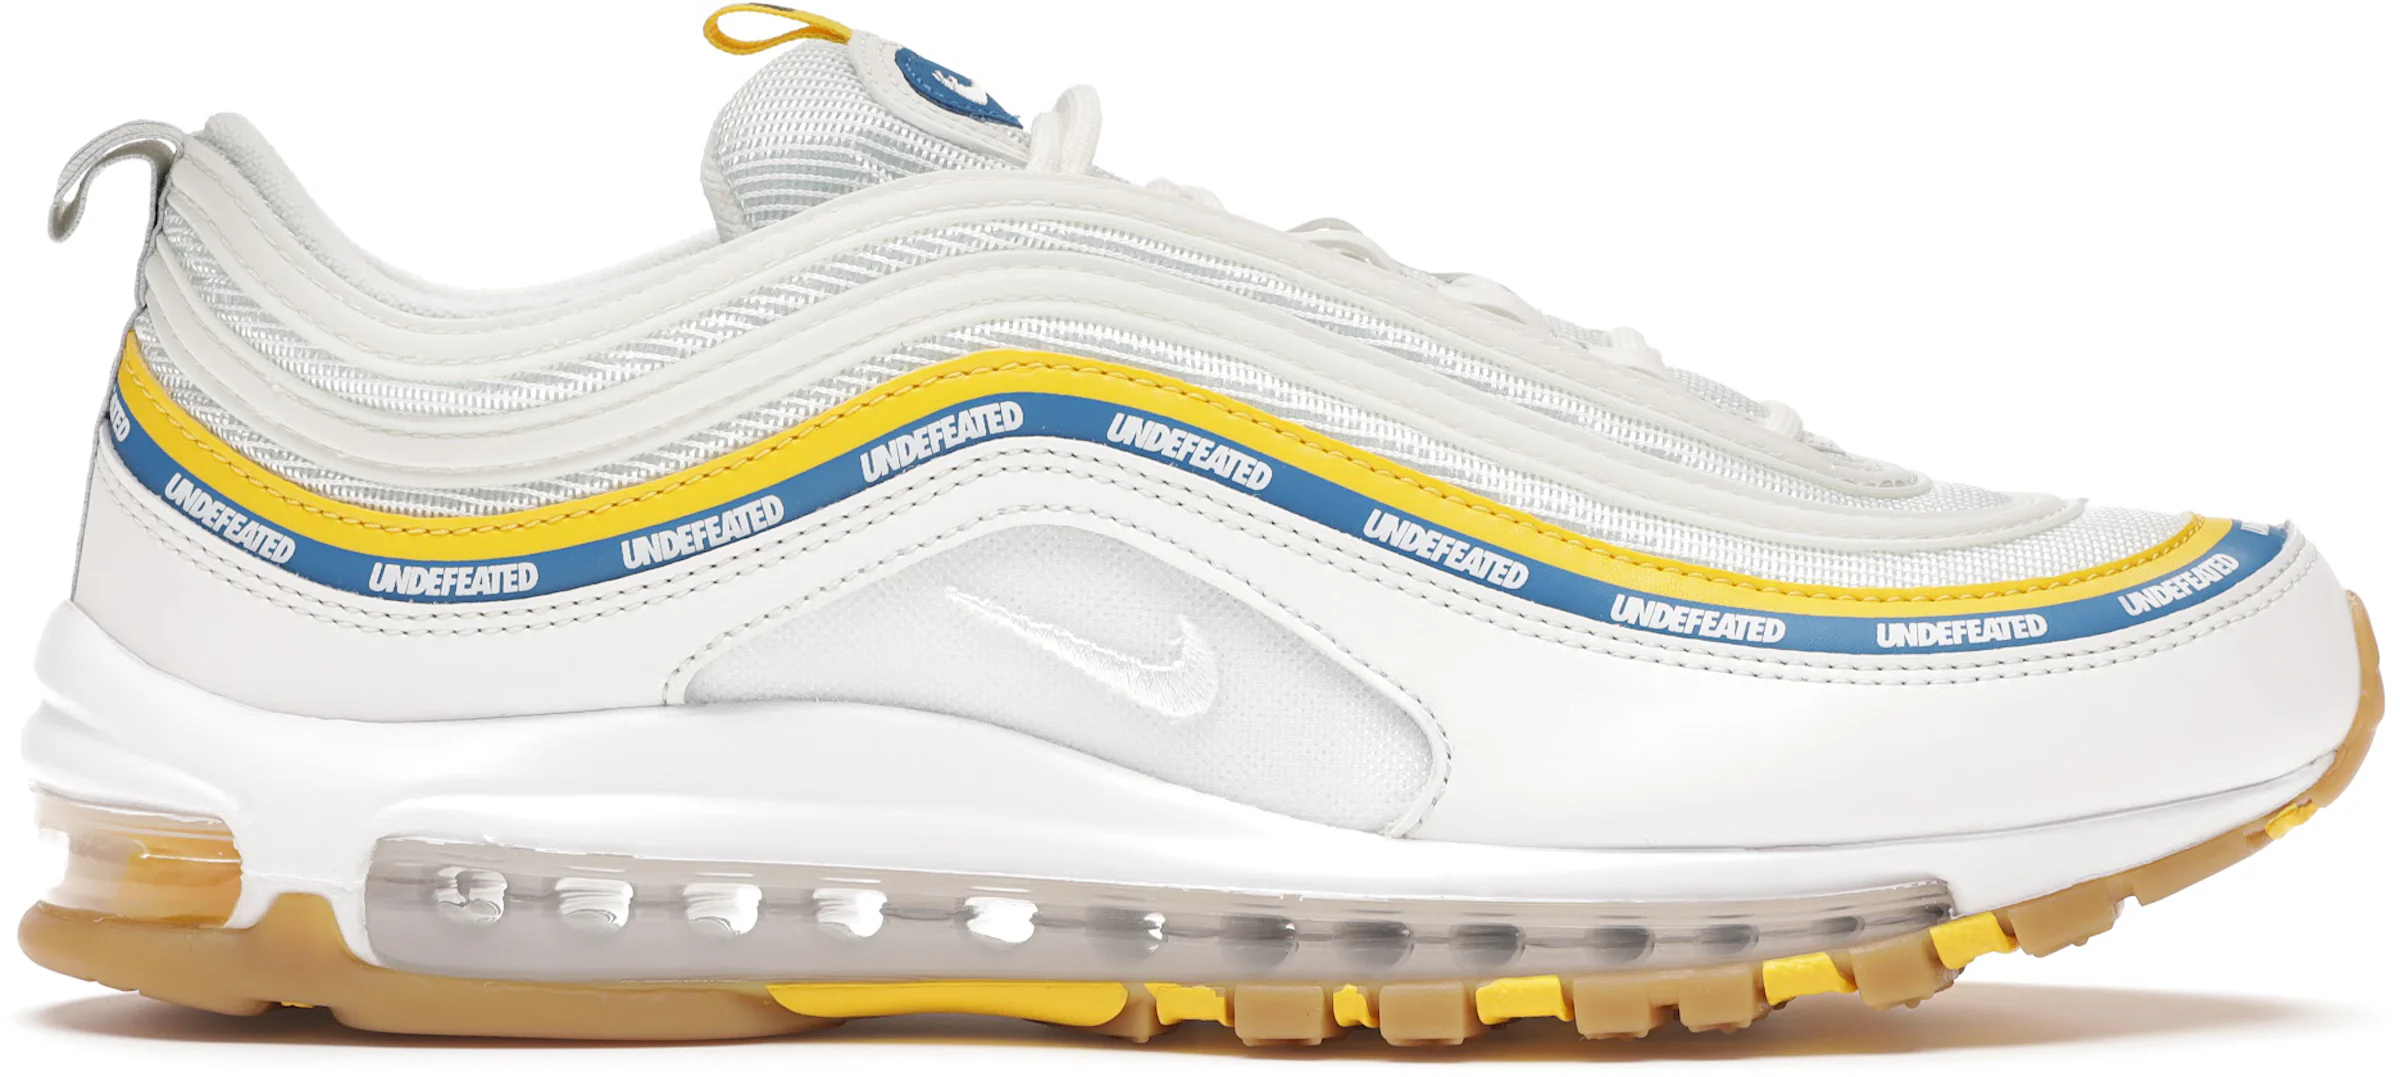 Nike Air Max 97 Undefeated UCLA Men's - DC4830-100 - US